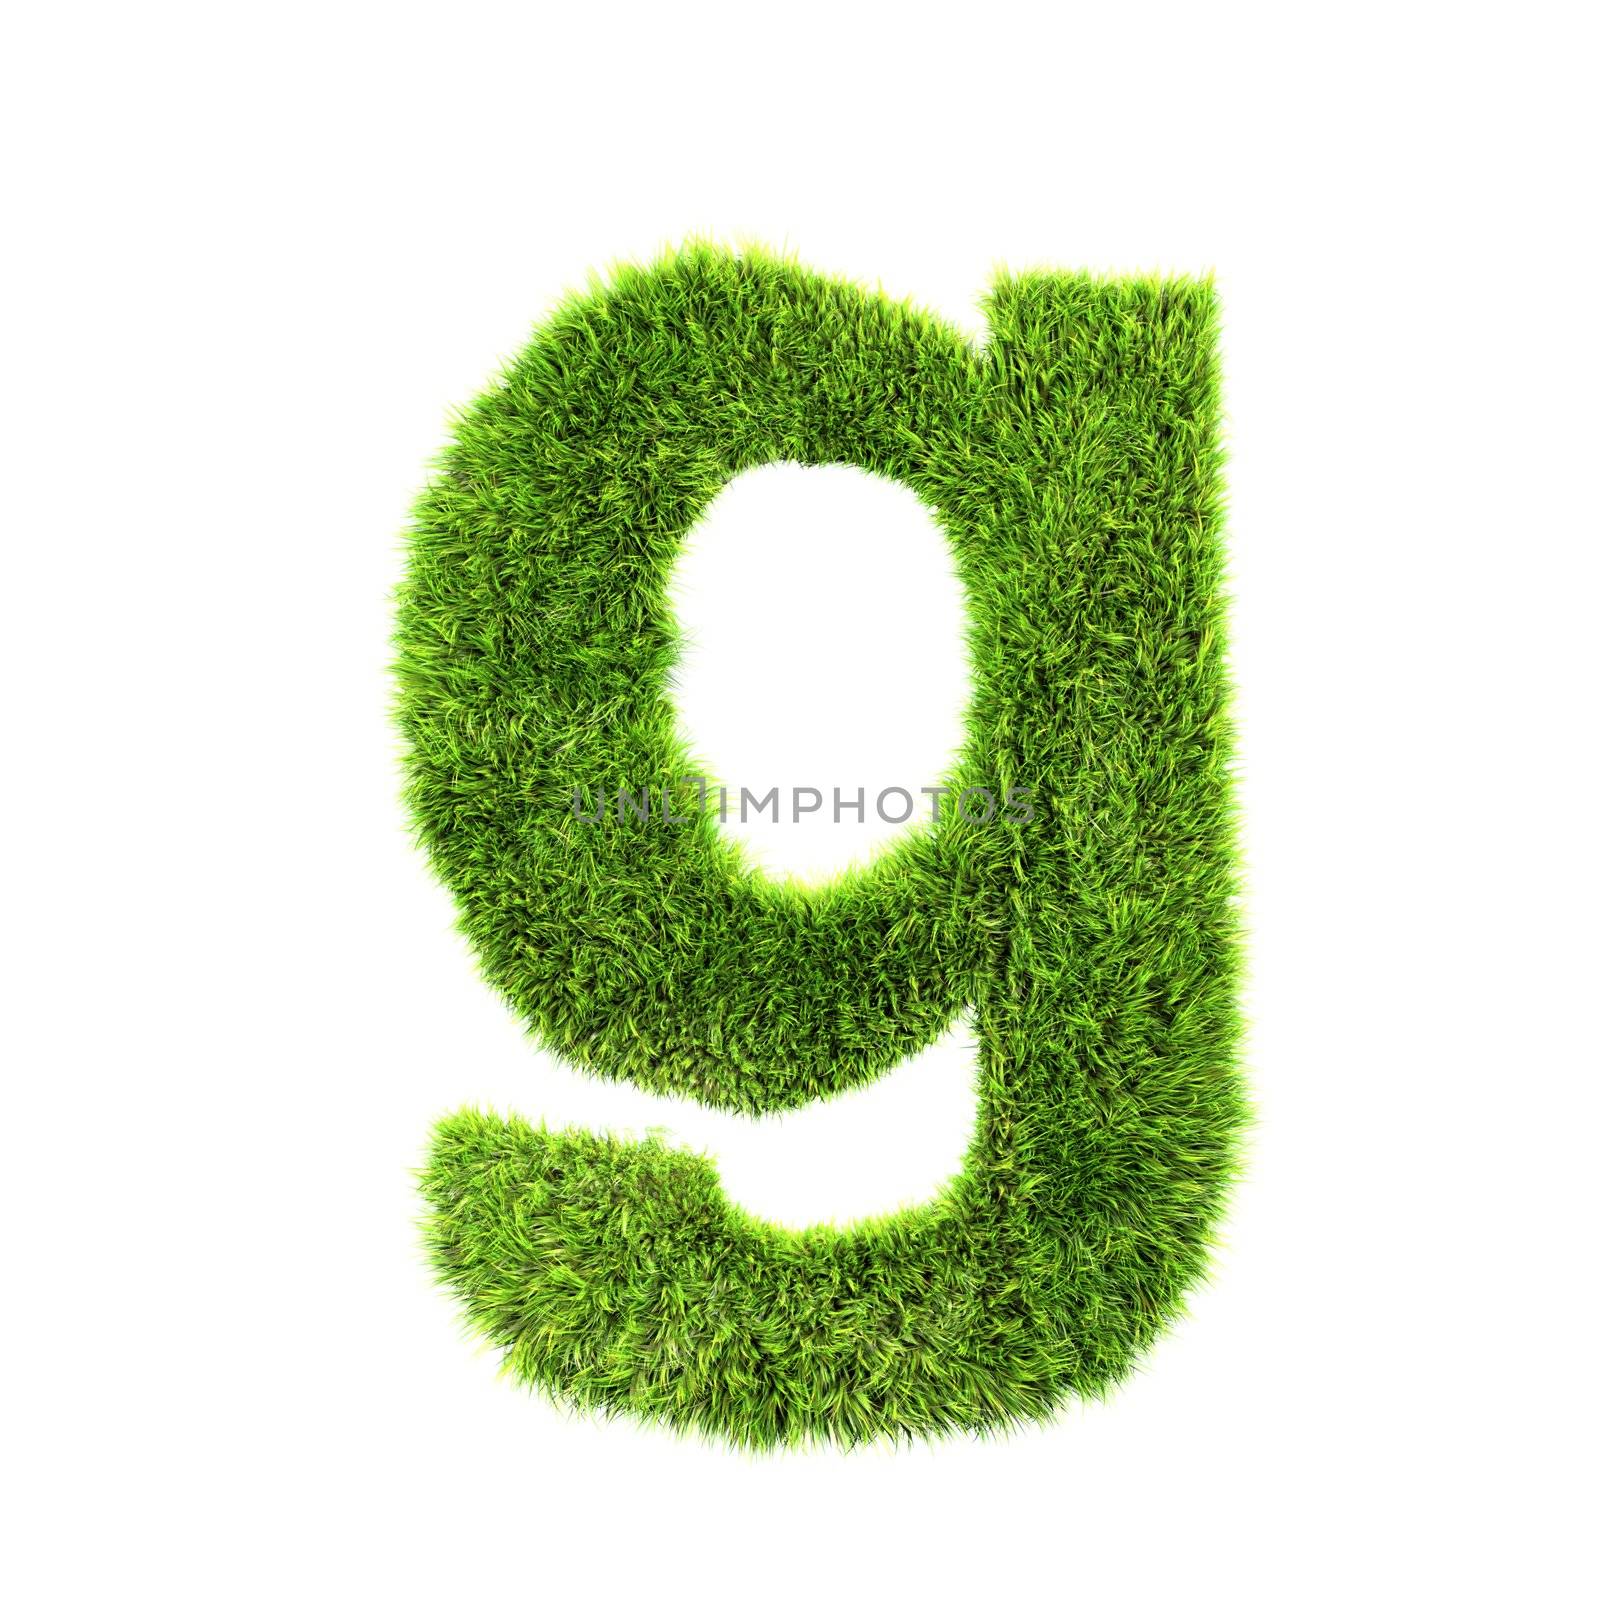 3d grass letter isolated on white background - g by chrisroll